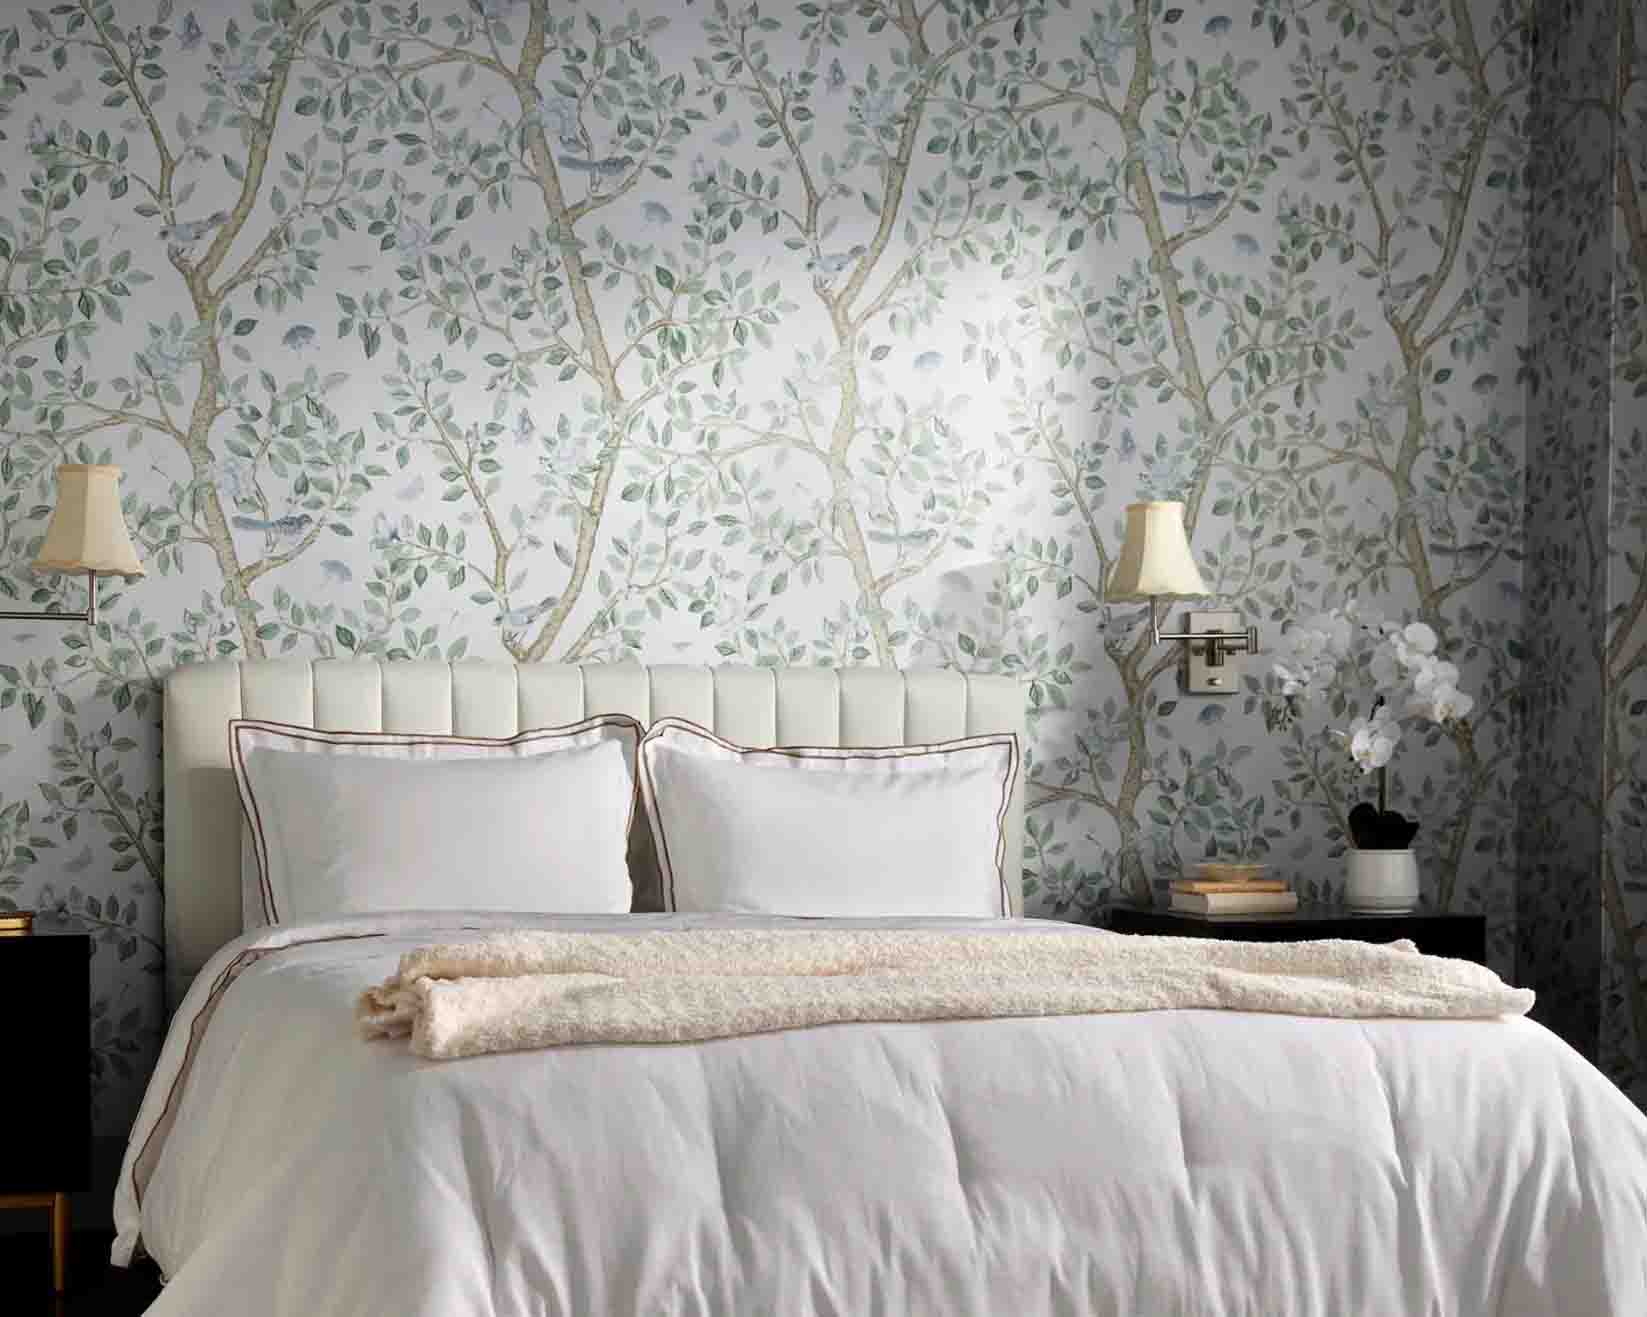 Silver Metallic Wallpaper with floral design, white double bed and dainty bedding